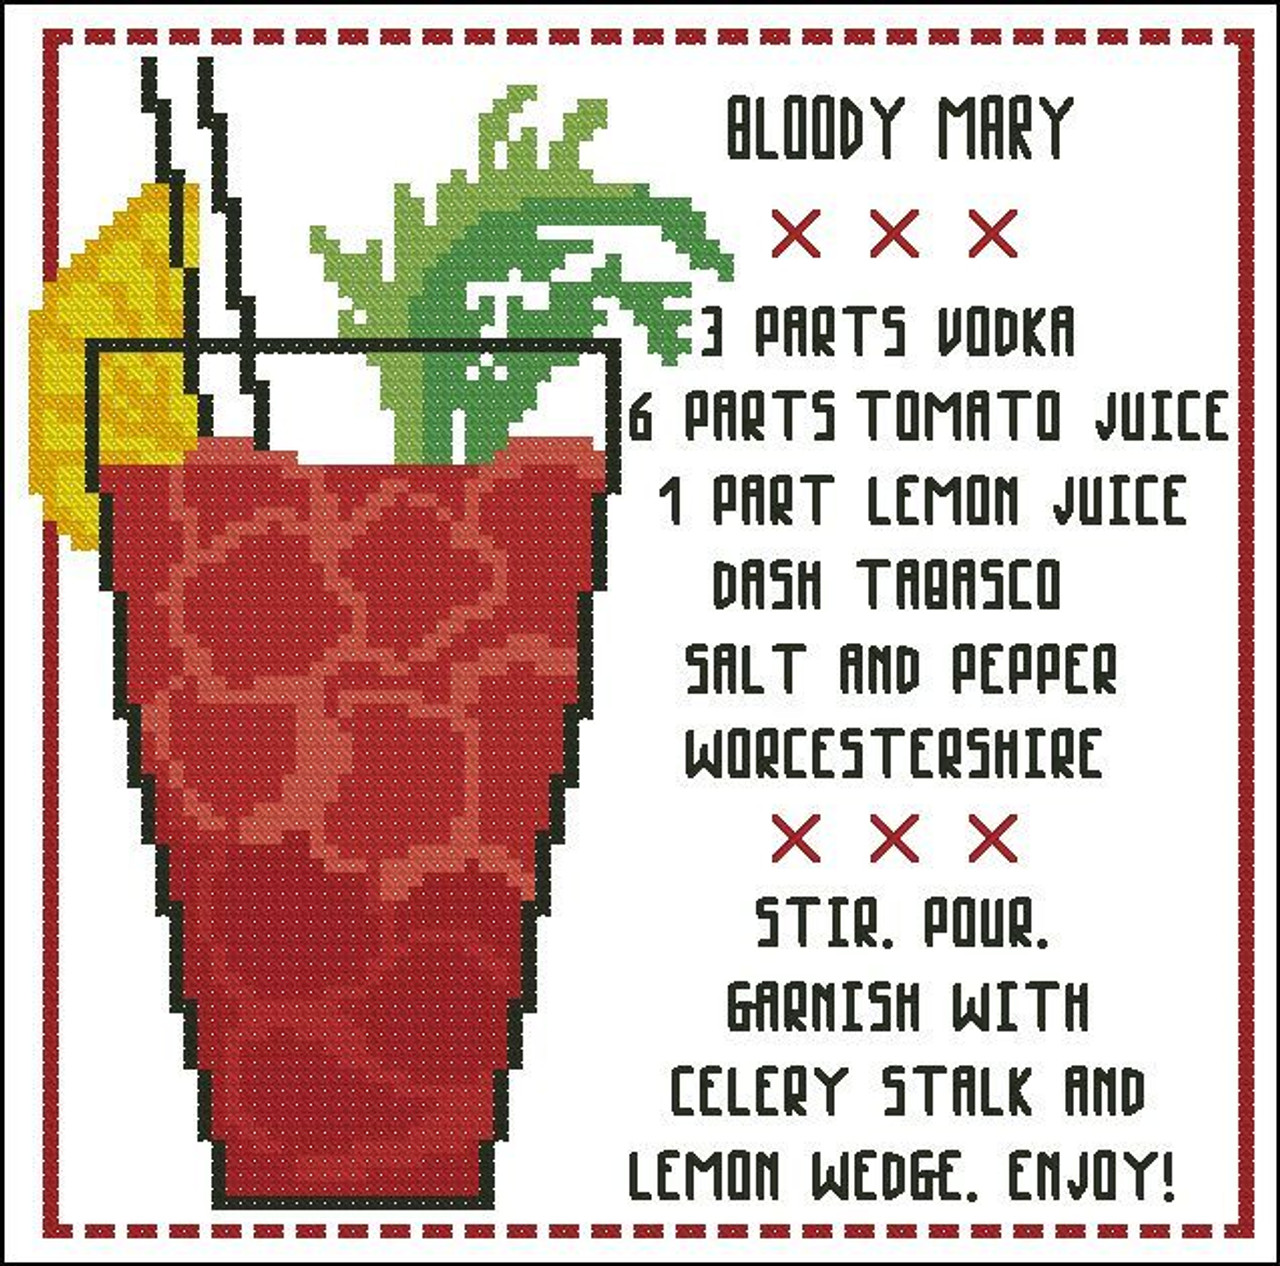 Cocktail: Bloody Mary